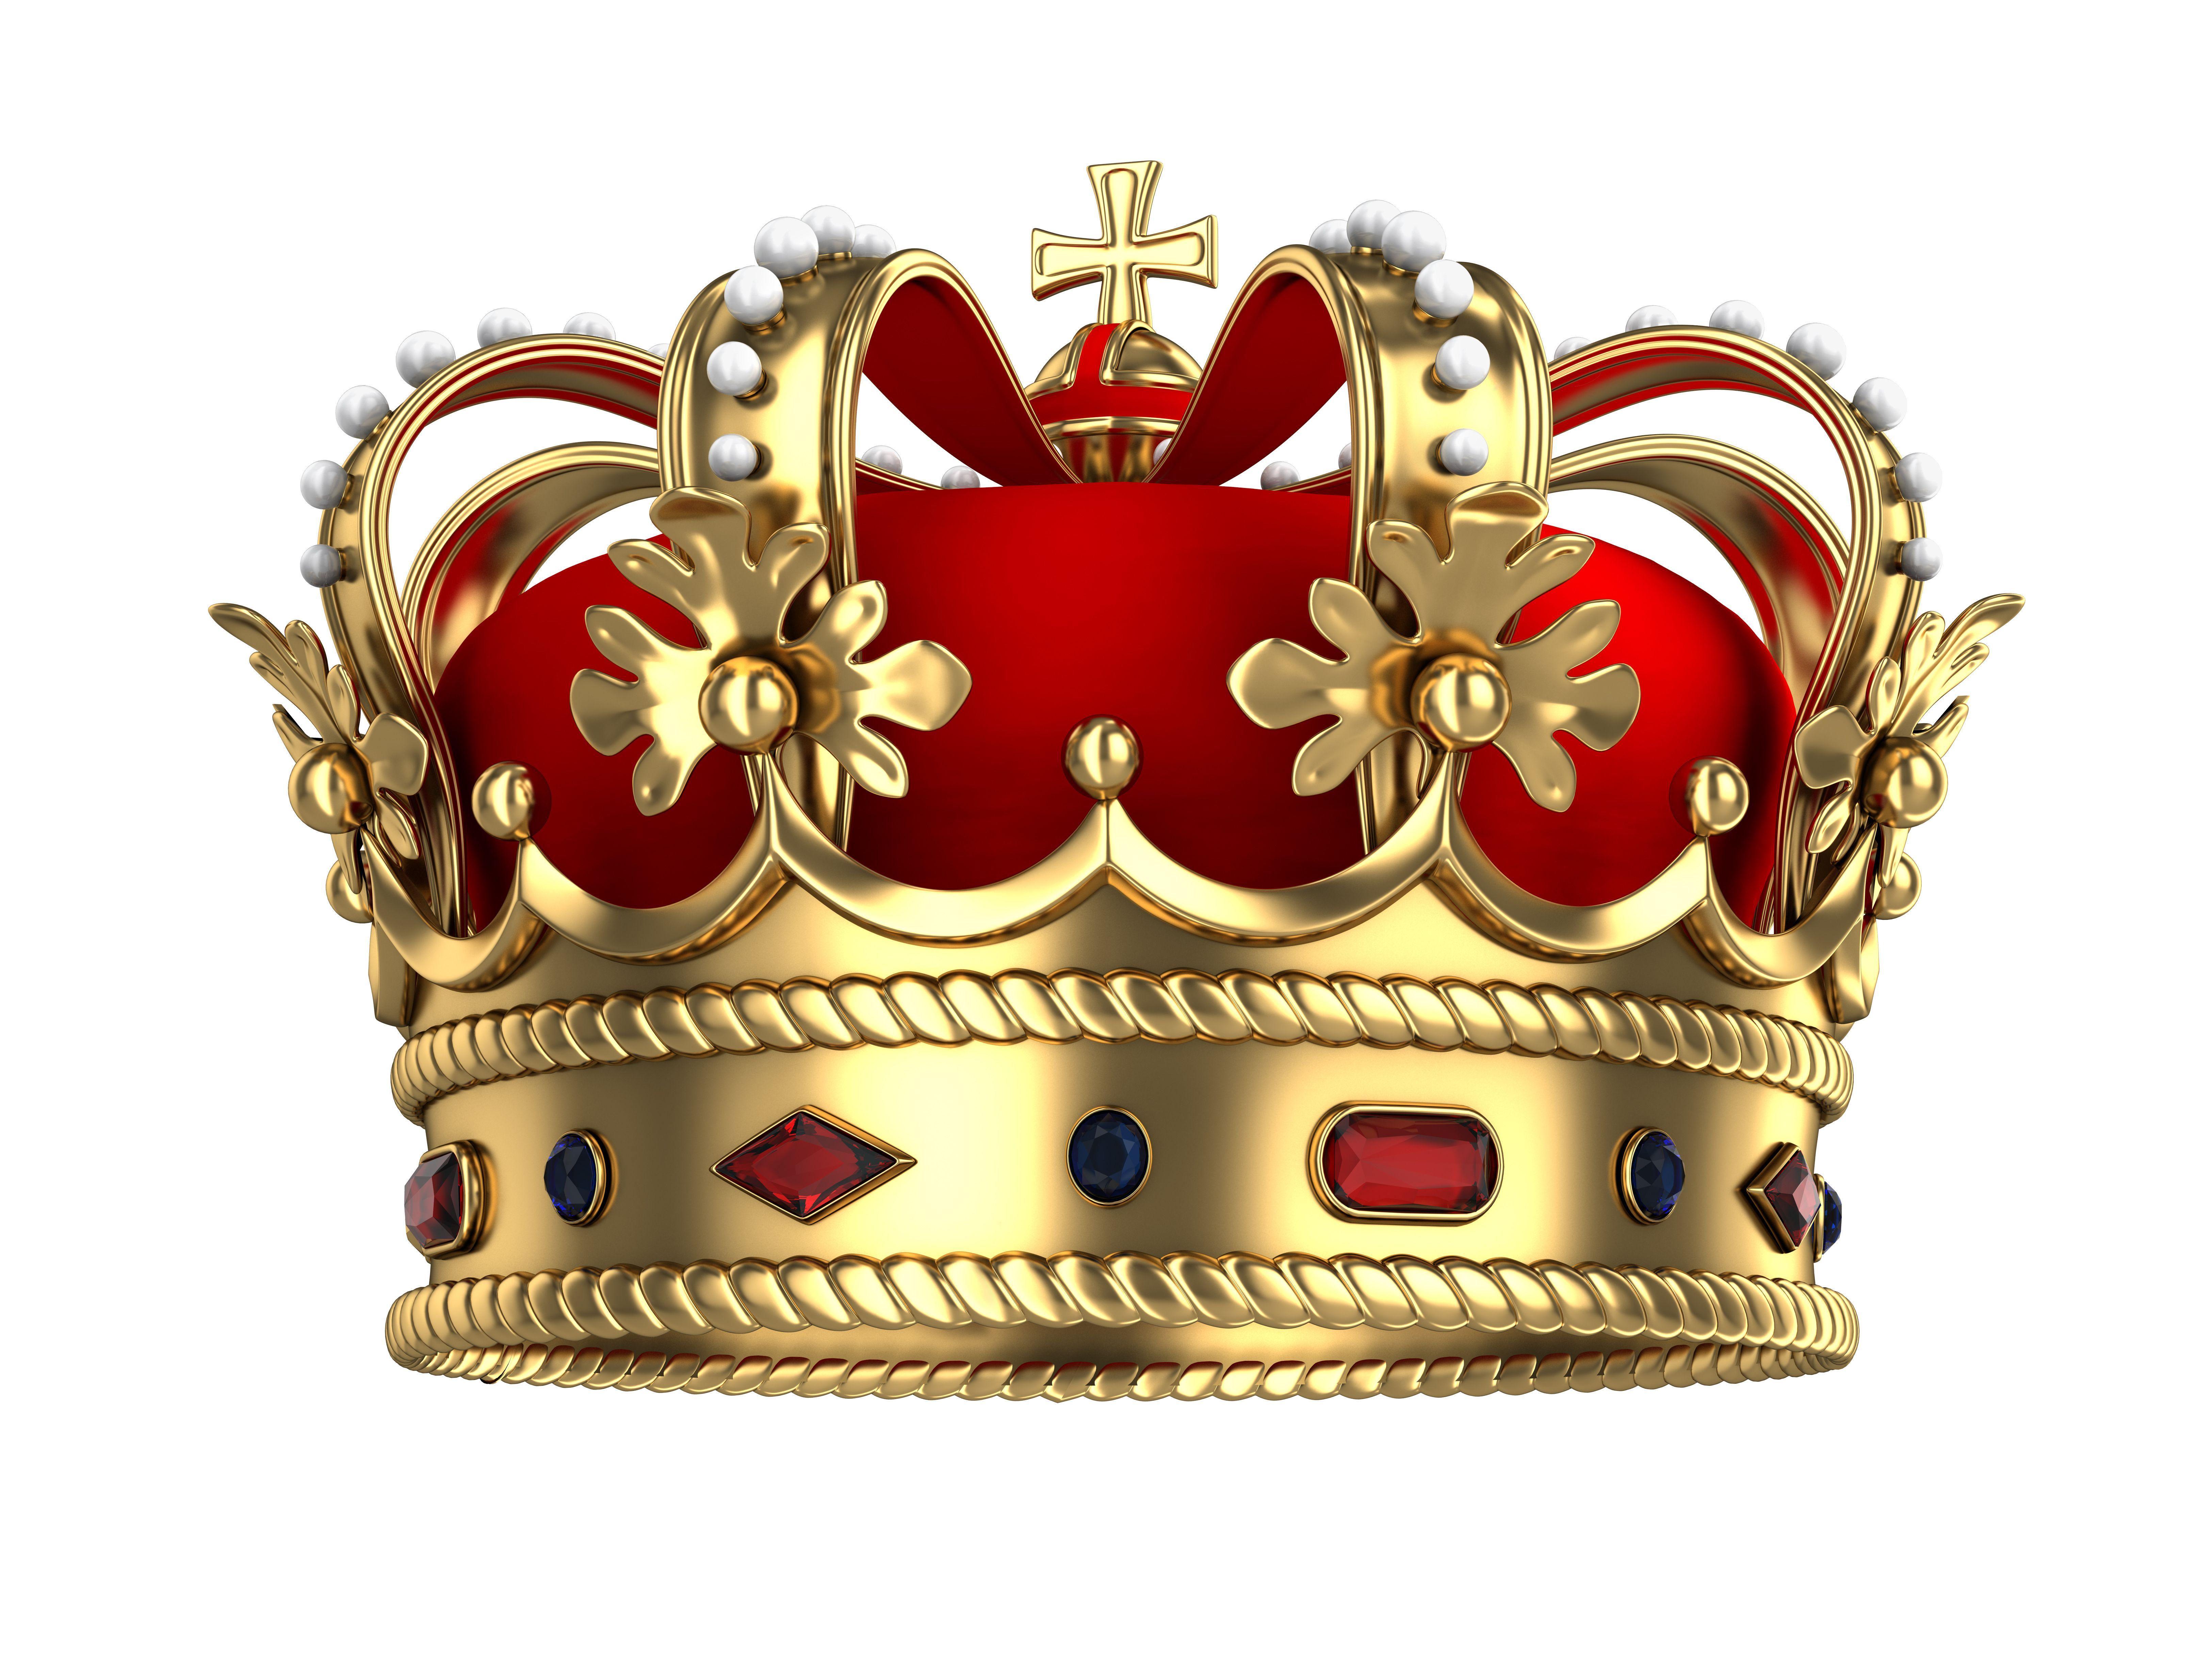 Red and Gold Crown Logo - King Crown PNG HD Transparent King Crown HD.PNG Images. | PlusPNG